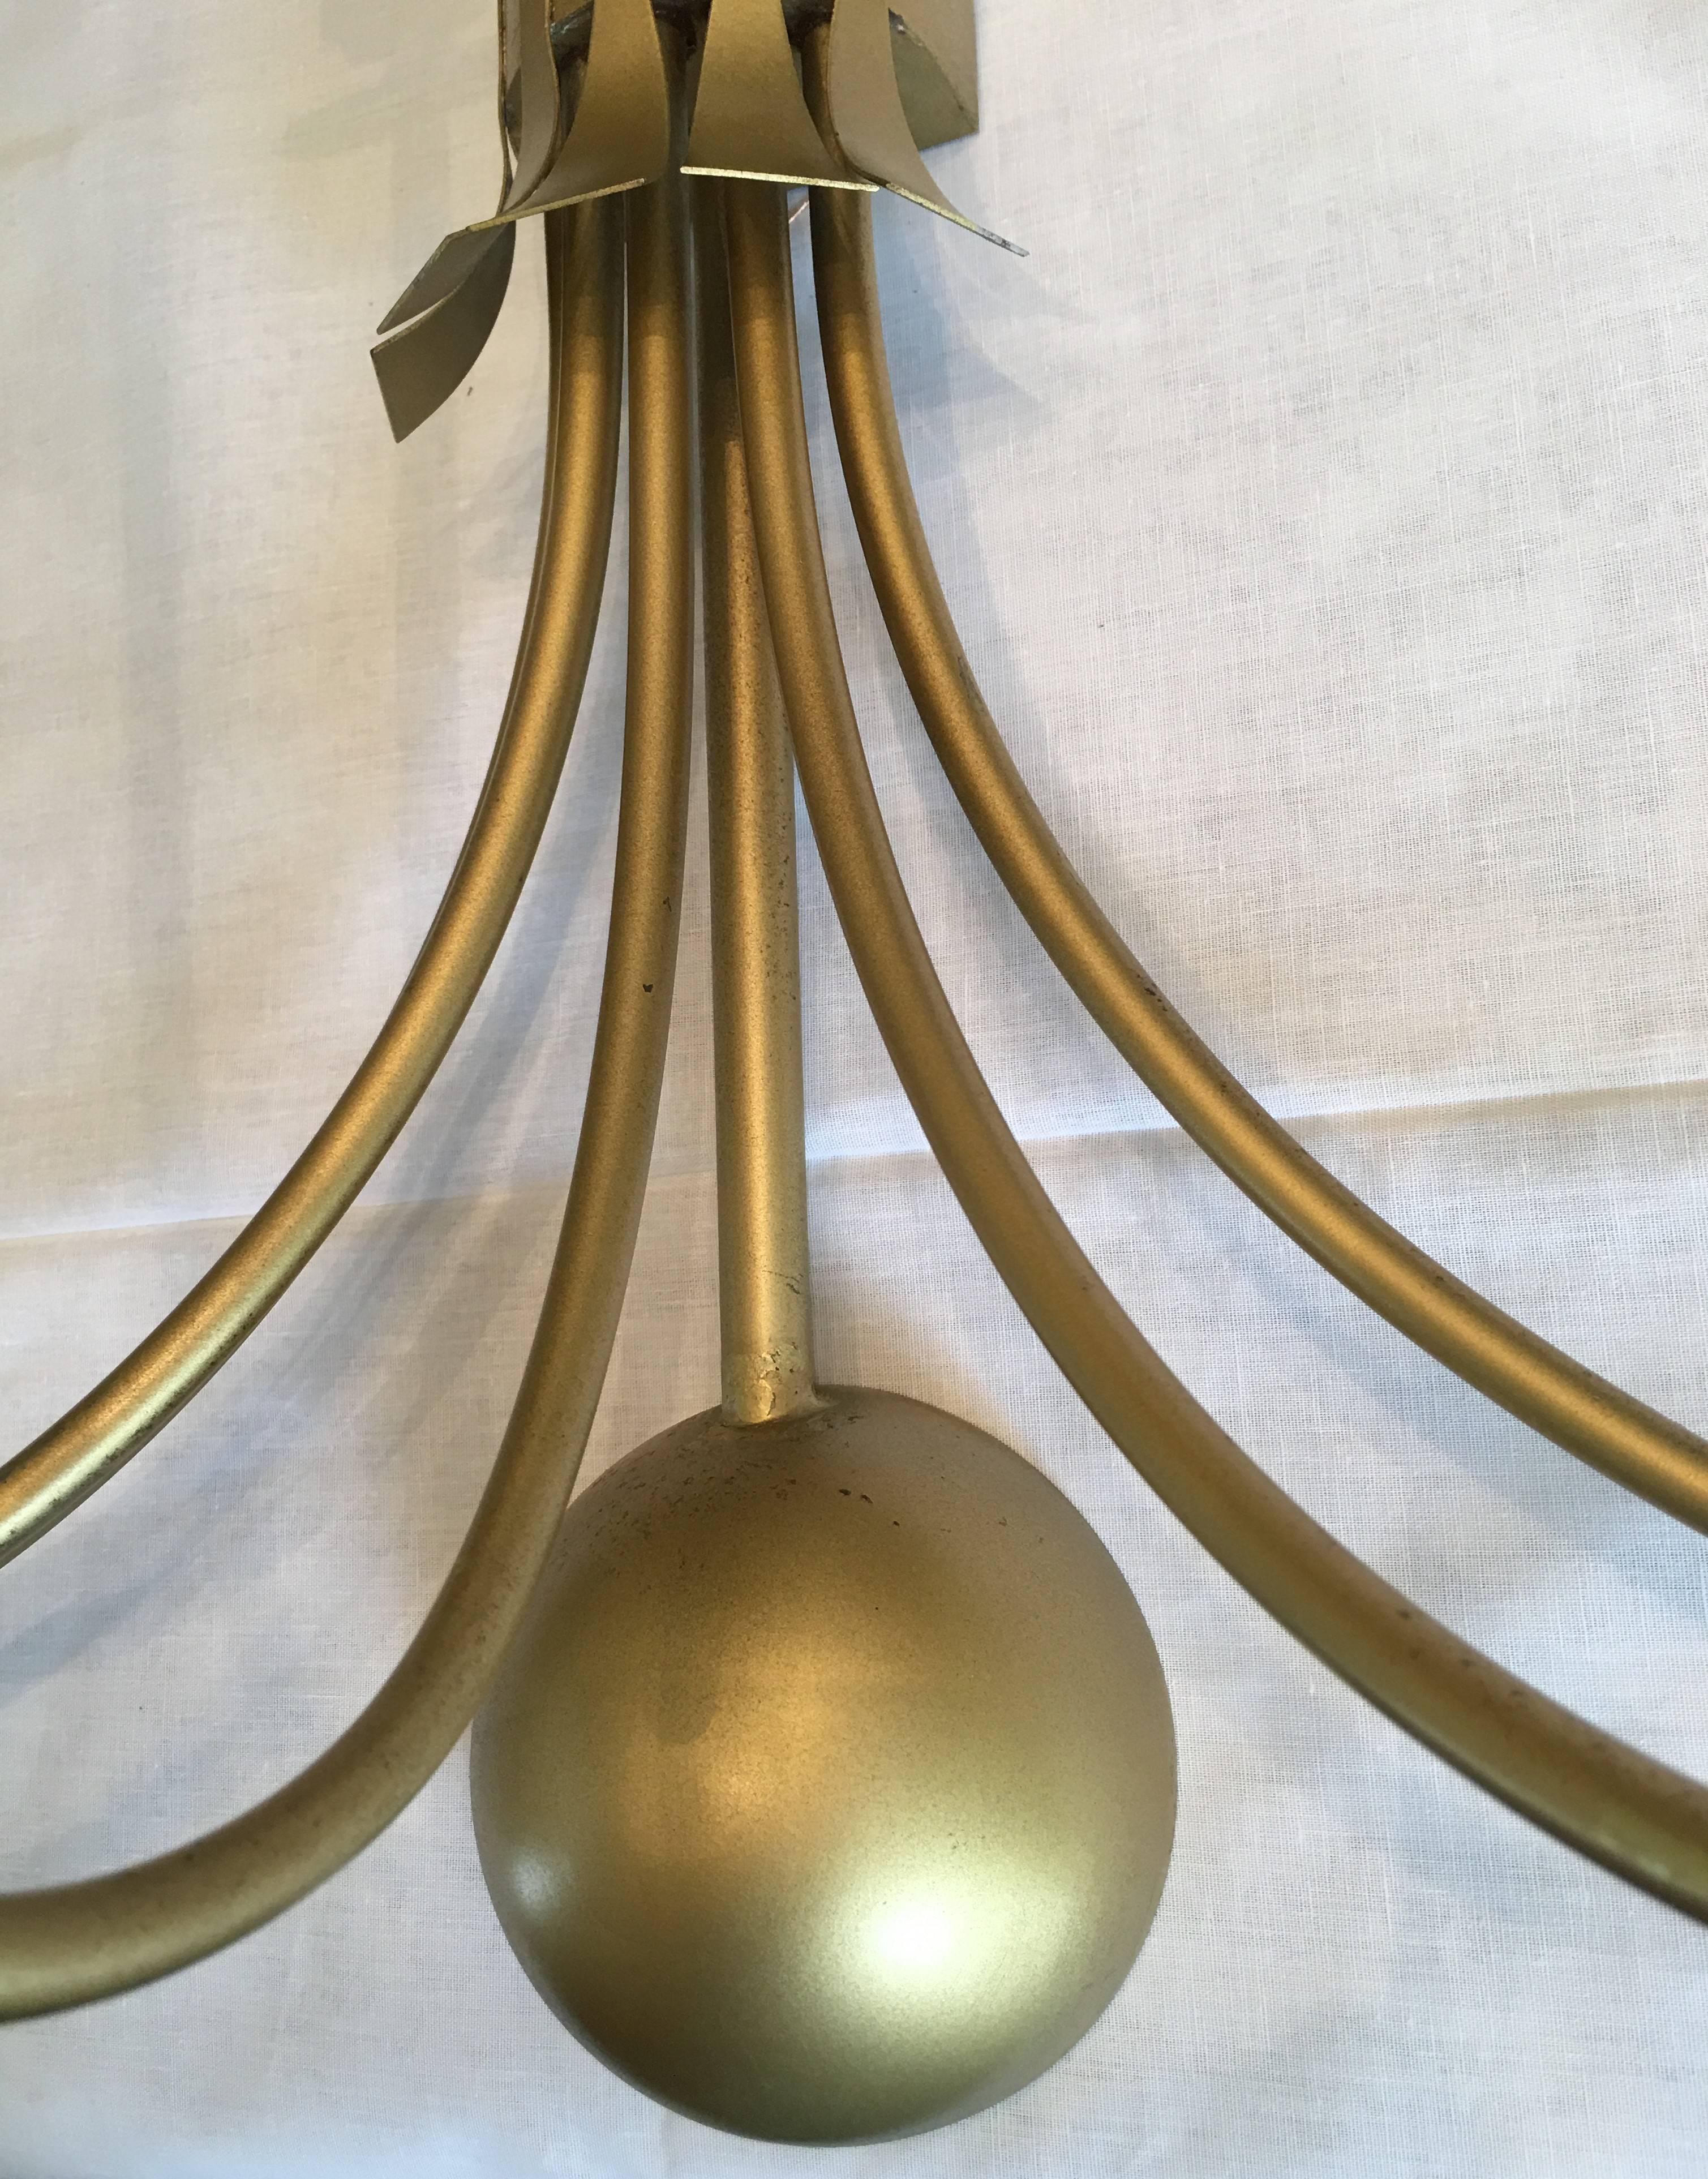 Four Monumental French Theater Sconces, Five Gilt Metal Curved Arms - 1950s For Sale 8